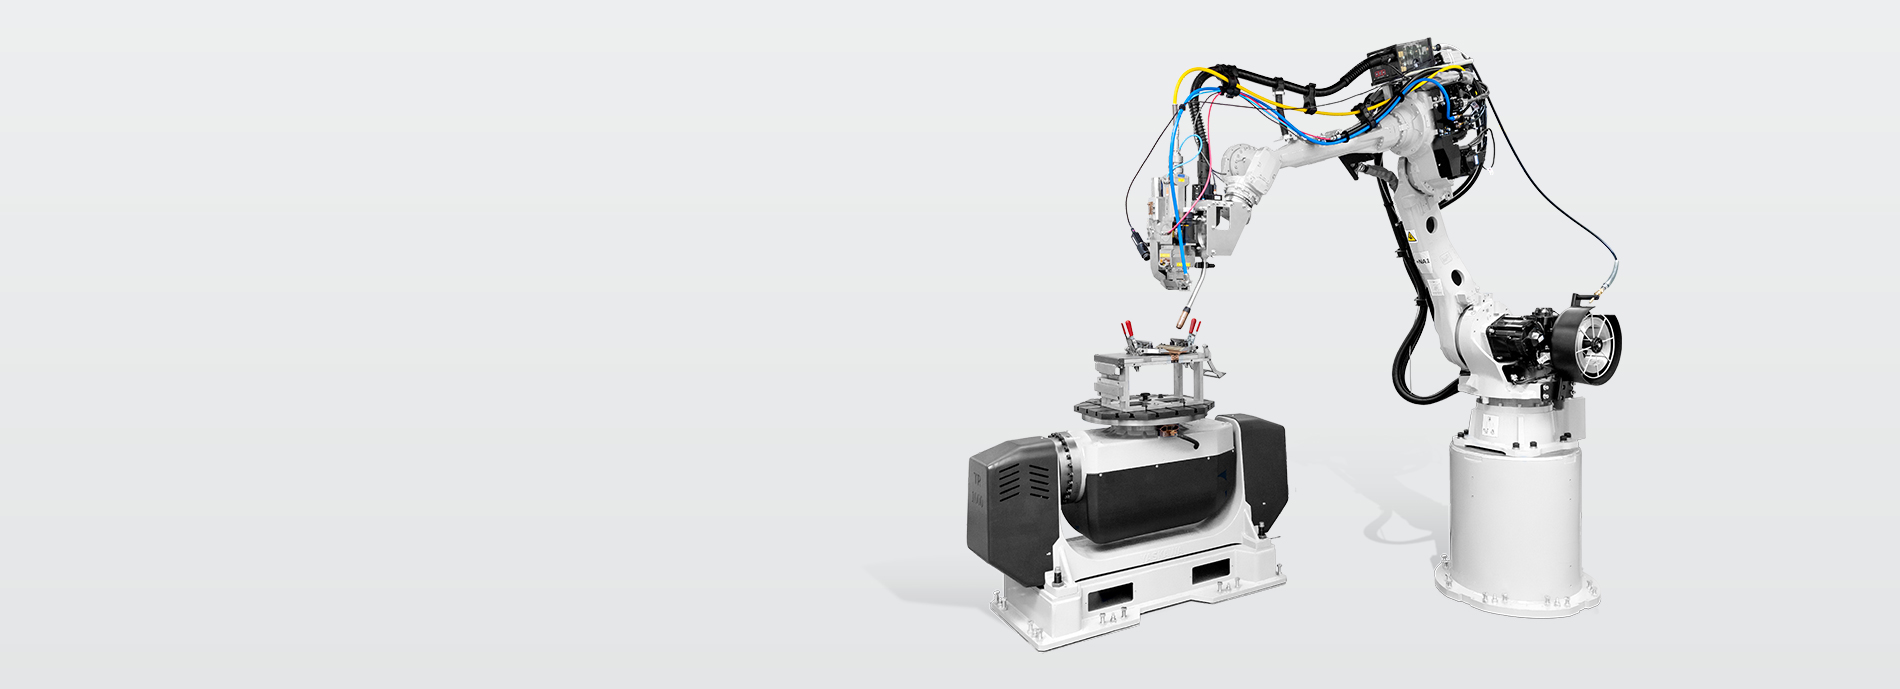 New SKS robotic welding lab with laser-assisted MIG process